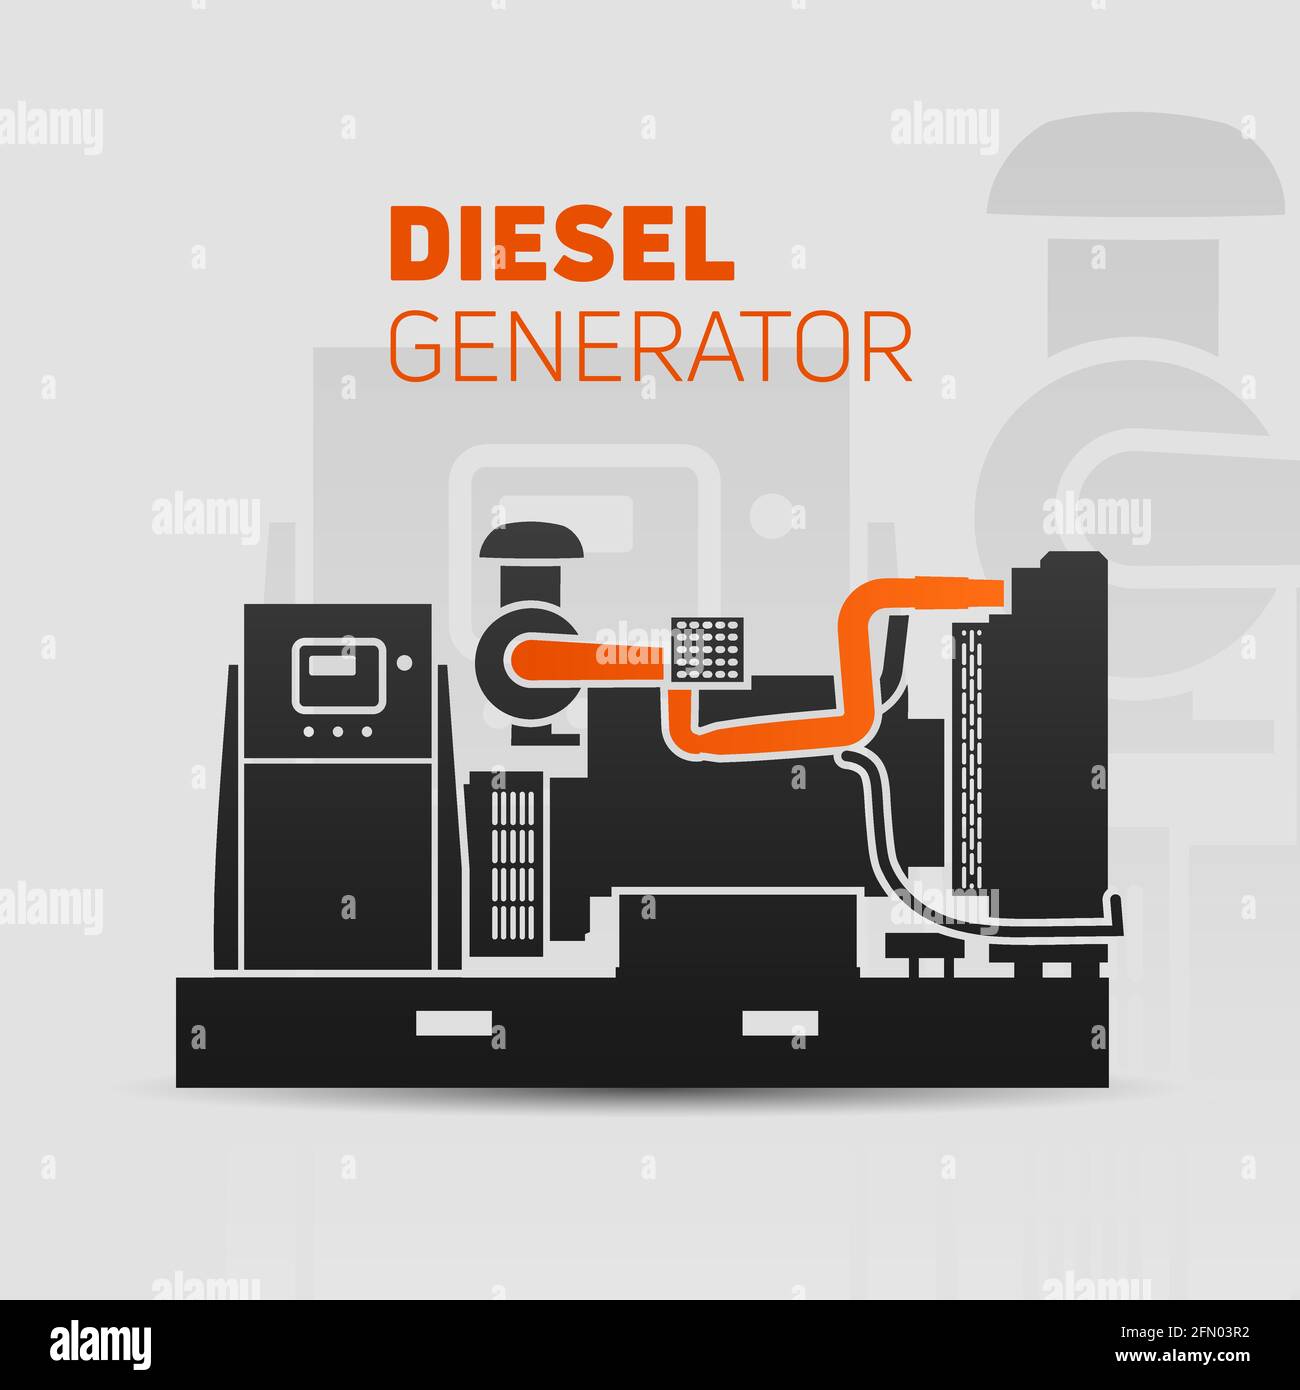 Diesel generator vector with yellow accent illustration template. Easy to edit, change size, color. Stock Vector